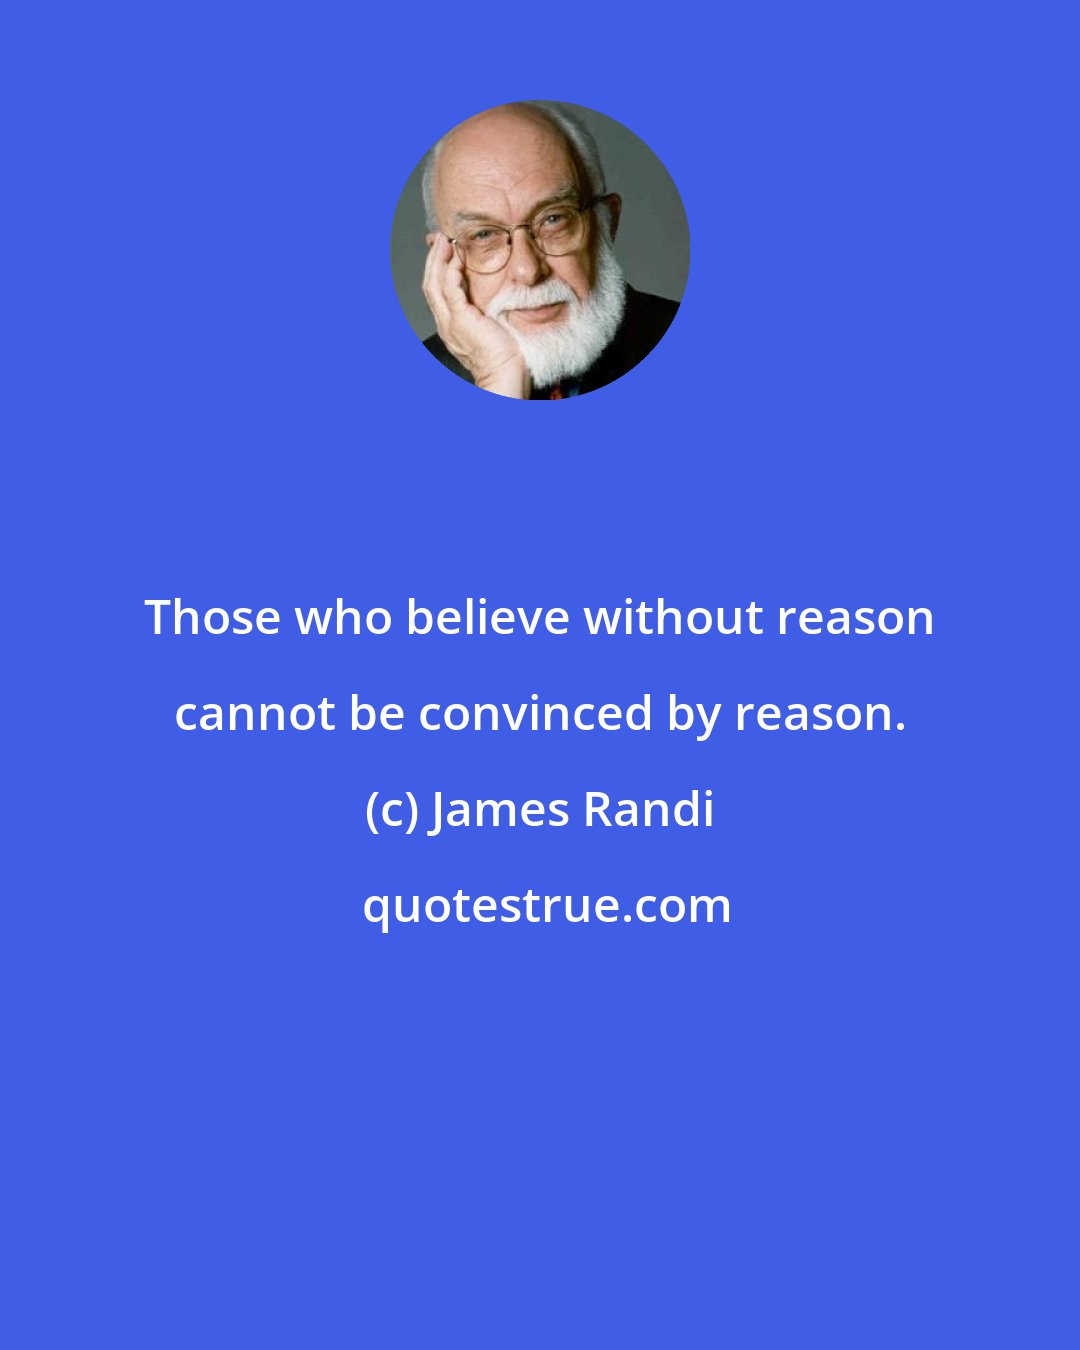 James Randi: Those who believe without reason cannot be convinced by reason.